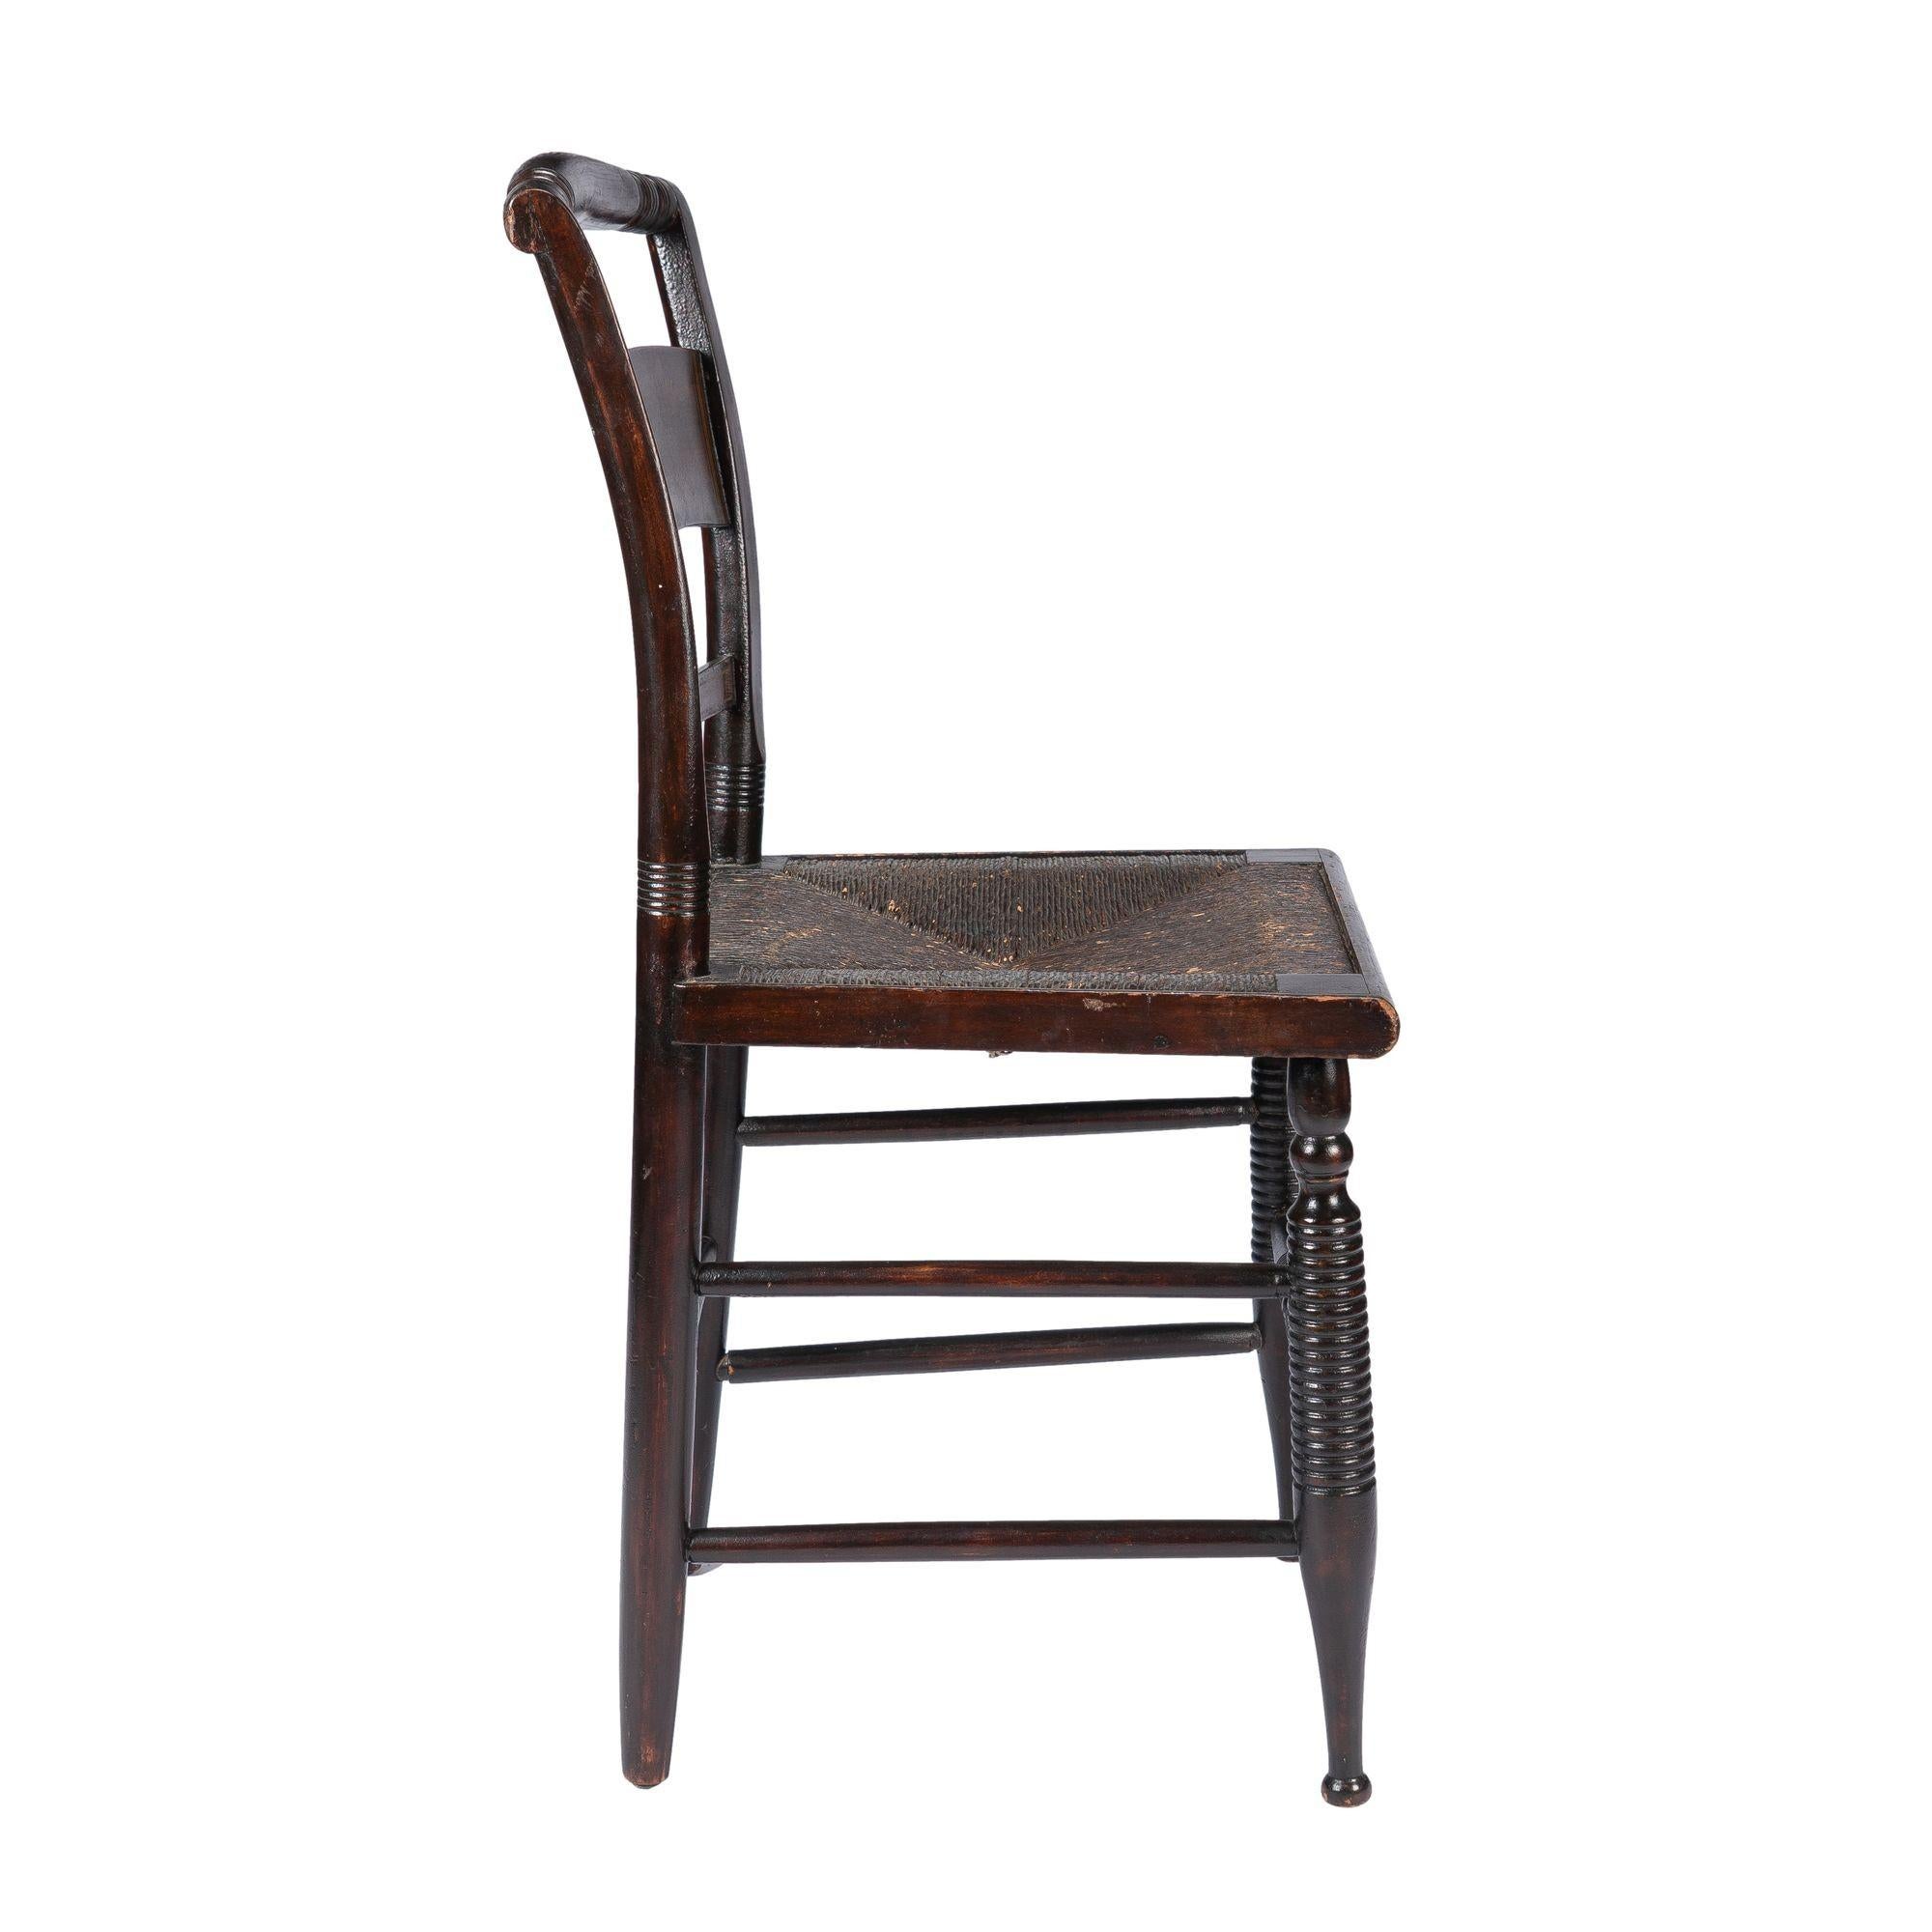 Connecticut Valley Hitchcock rush seat side chair, 1820 1